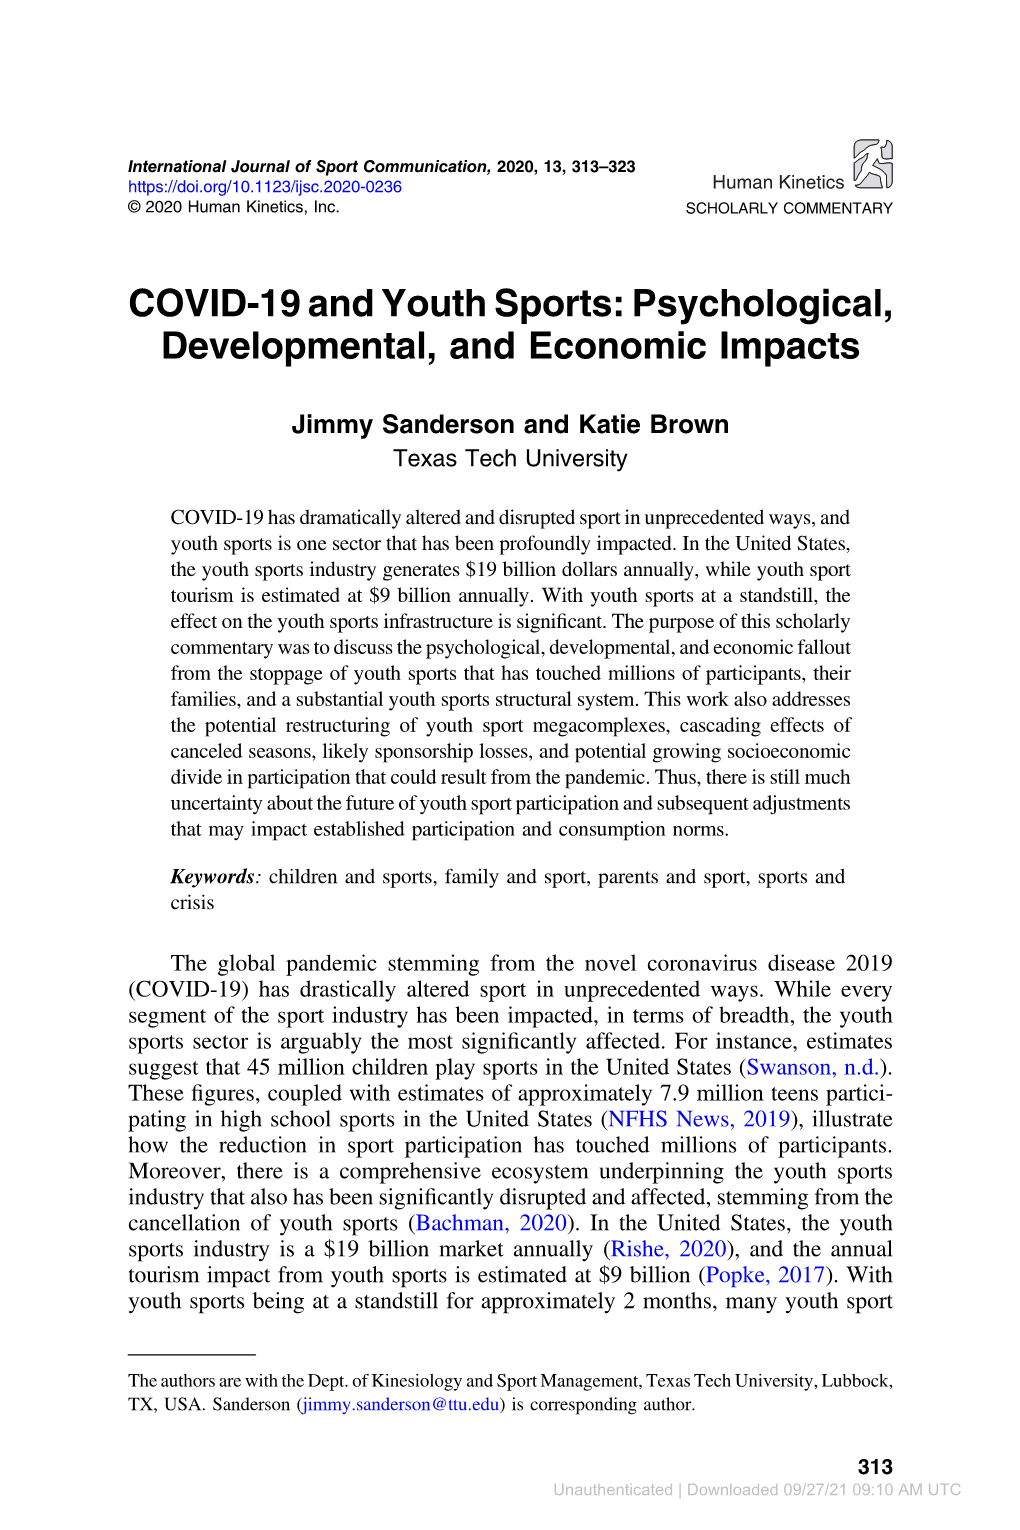 COVID-19 and Youth Sports: Psychological, Developmental, and Economic Impacts